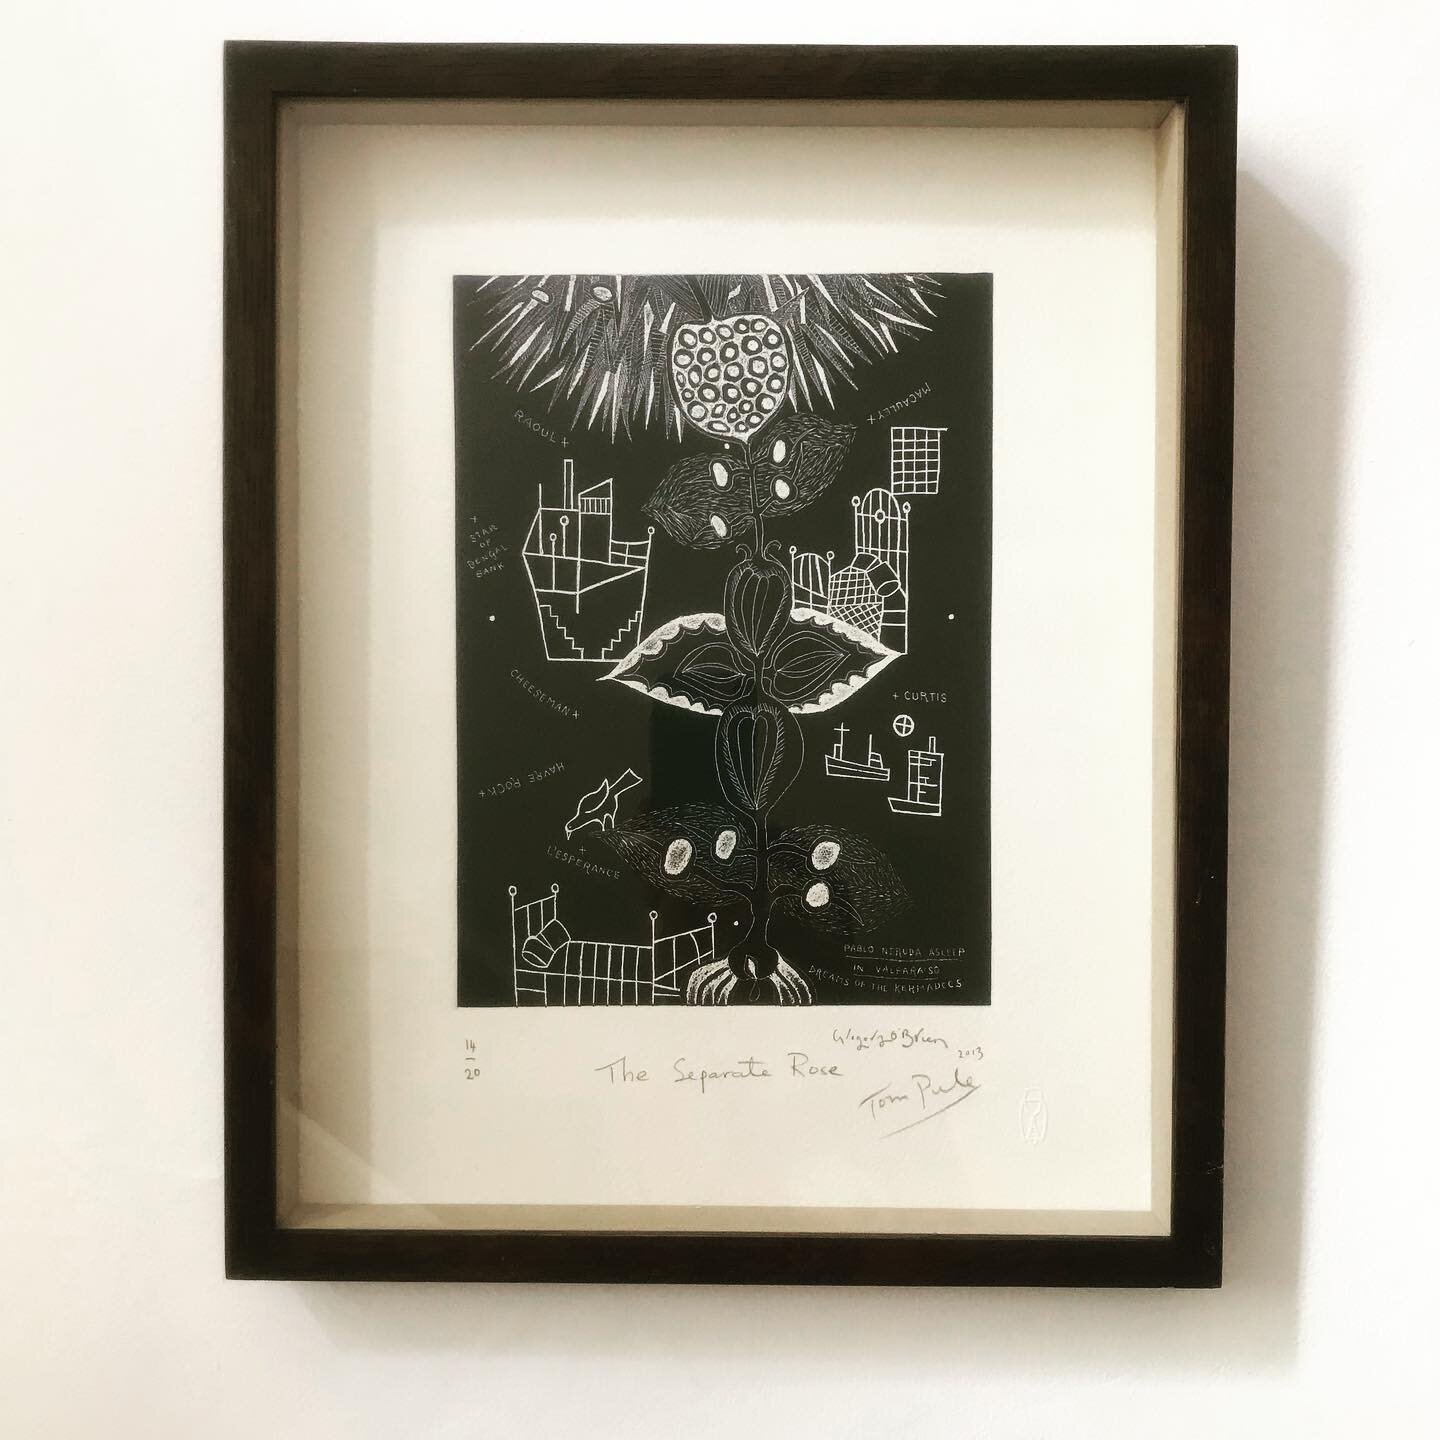 A newly framed delight is finally installed in our London base. &lsquo;The Separate Rose&rsquo;, an incredible print by the wonderful John Pule that resonates with Pablo Neruda&rsquo;s poetry. Thank you 🙏🏼@likupoet. Feeling blessed!